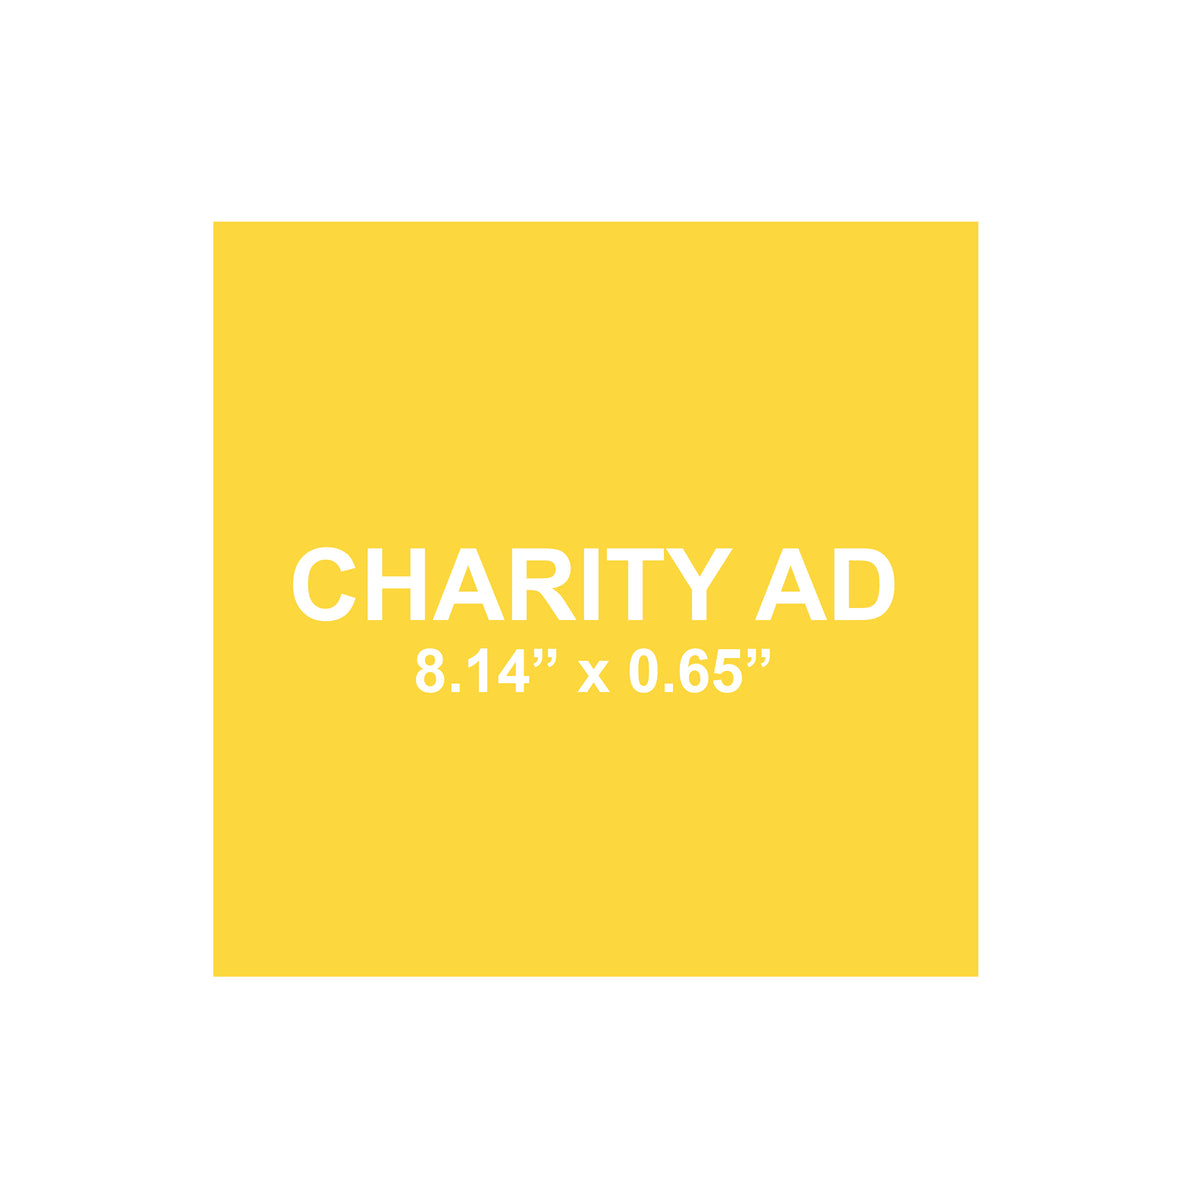 Charity Ad Space | The Small Business Publicist